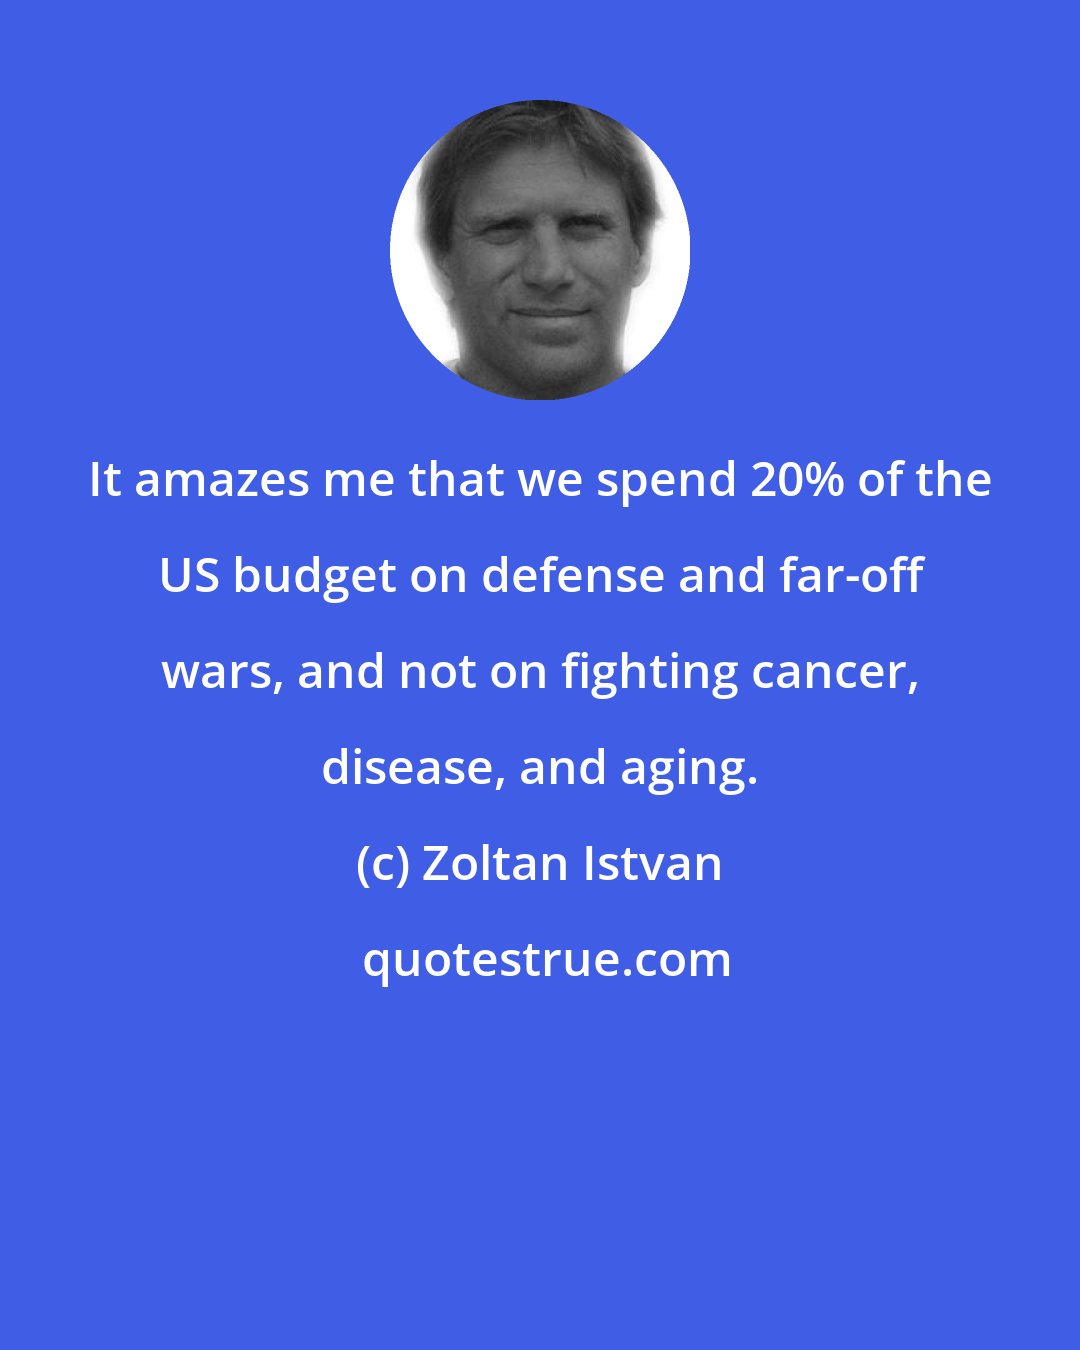 Zoltan Istvan: It amazes me that we spend 20% of the US budget on defense and far-off wars, and not on fighting cancer, disease, and aging.